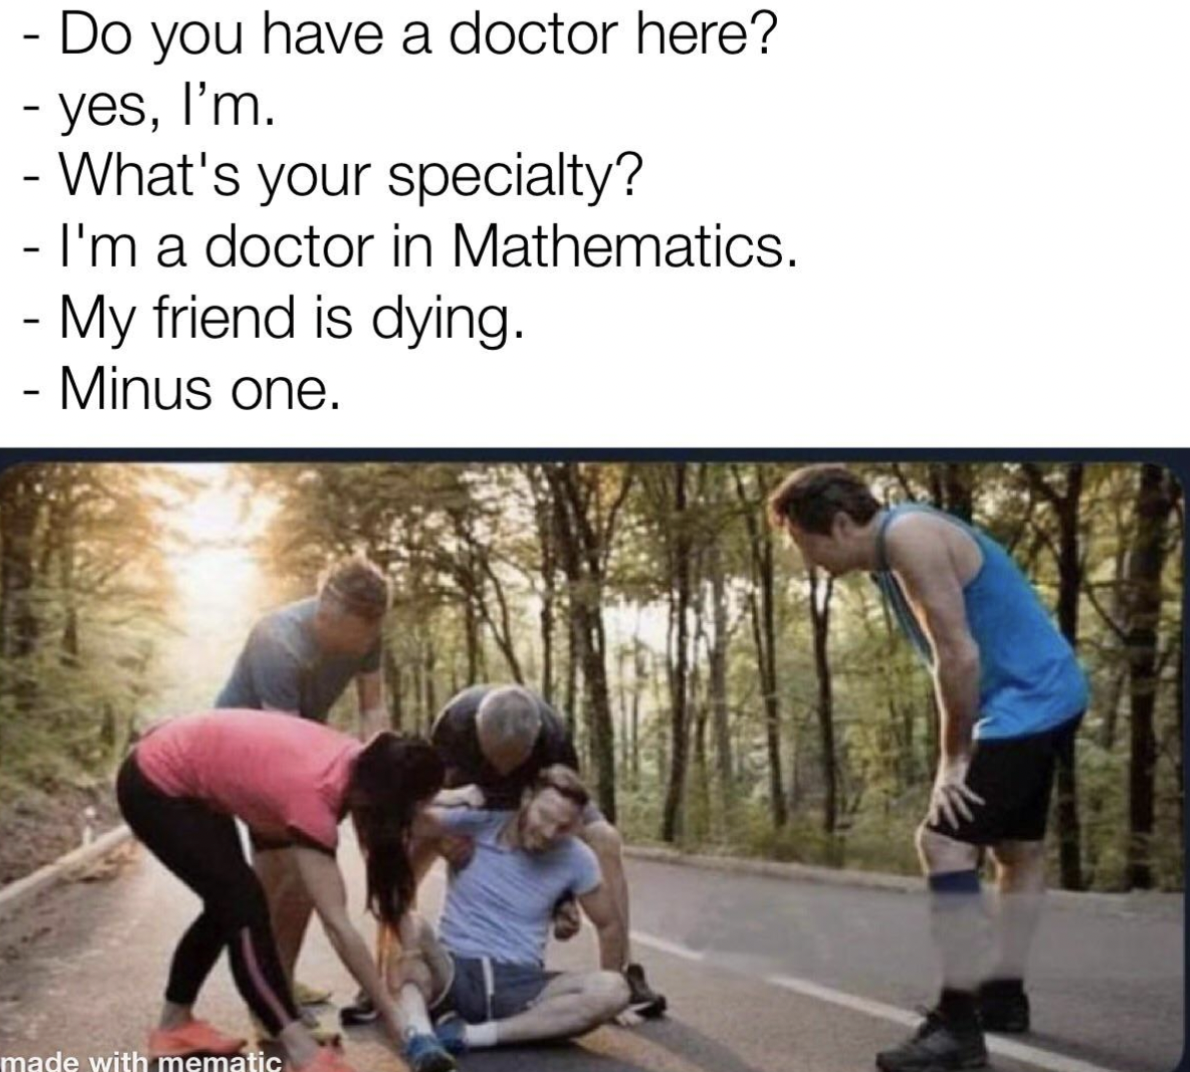 doctor of math meme - Do you have a doctor here? yes, I'm. What's your specialty? I'm a doctor in Mathematics. My friend is dying. Minus one.